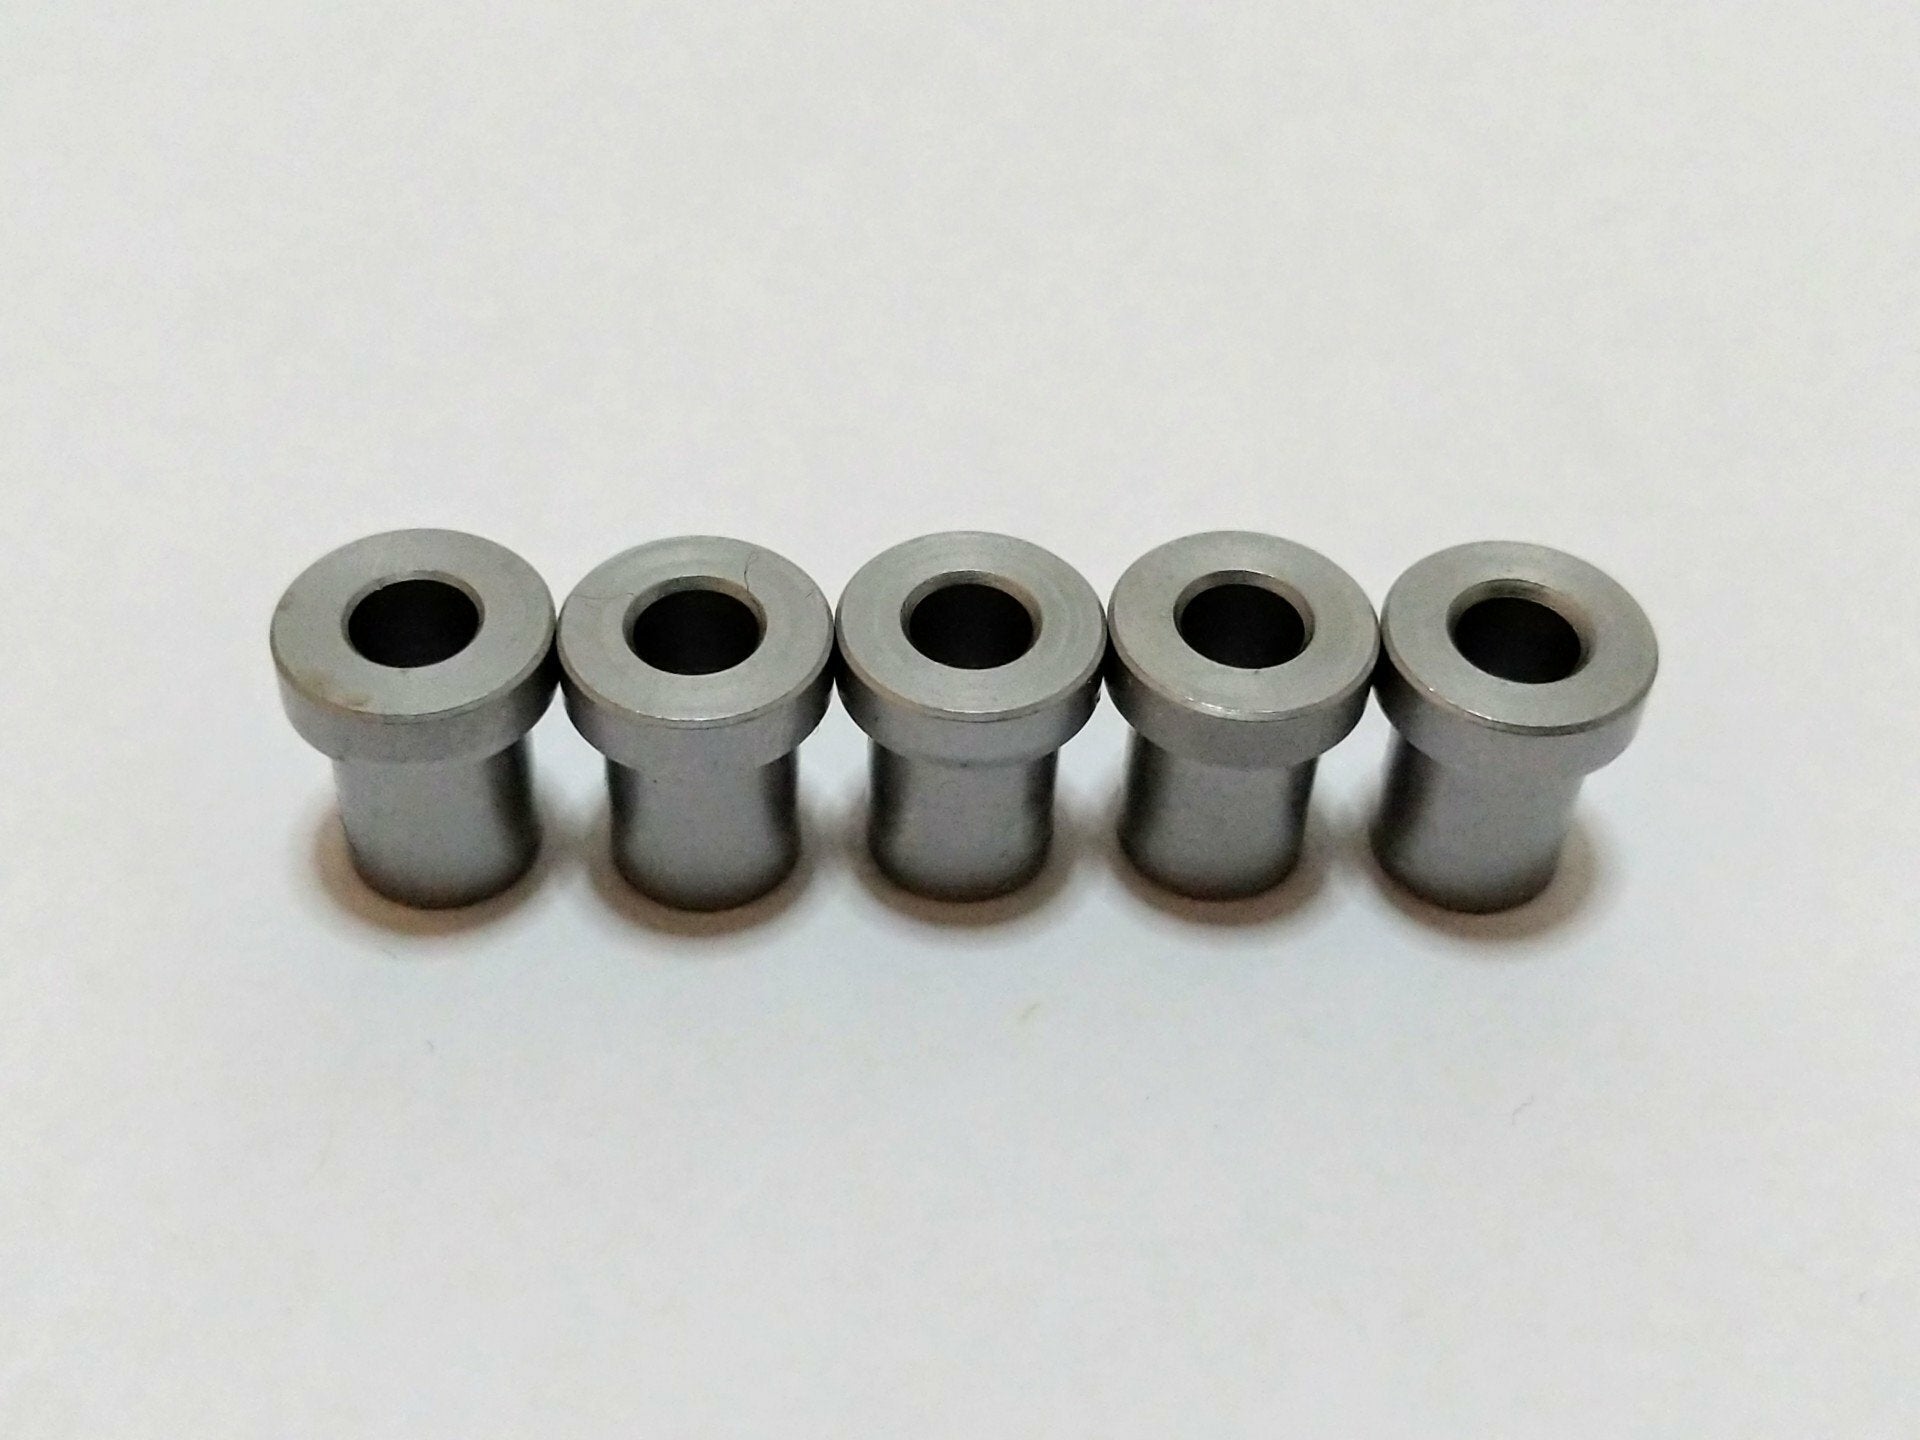 Thrifty Press-Fit Drill Bushings